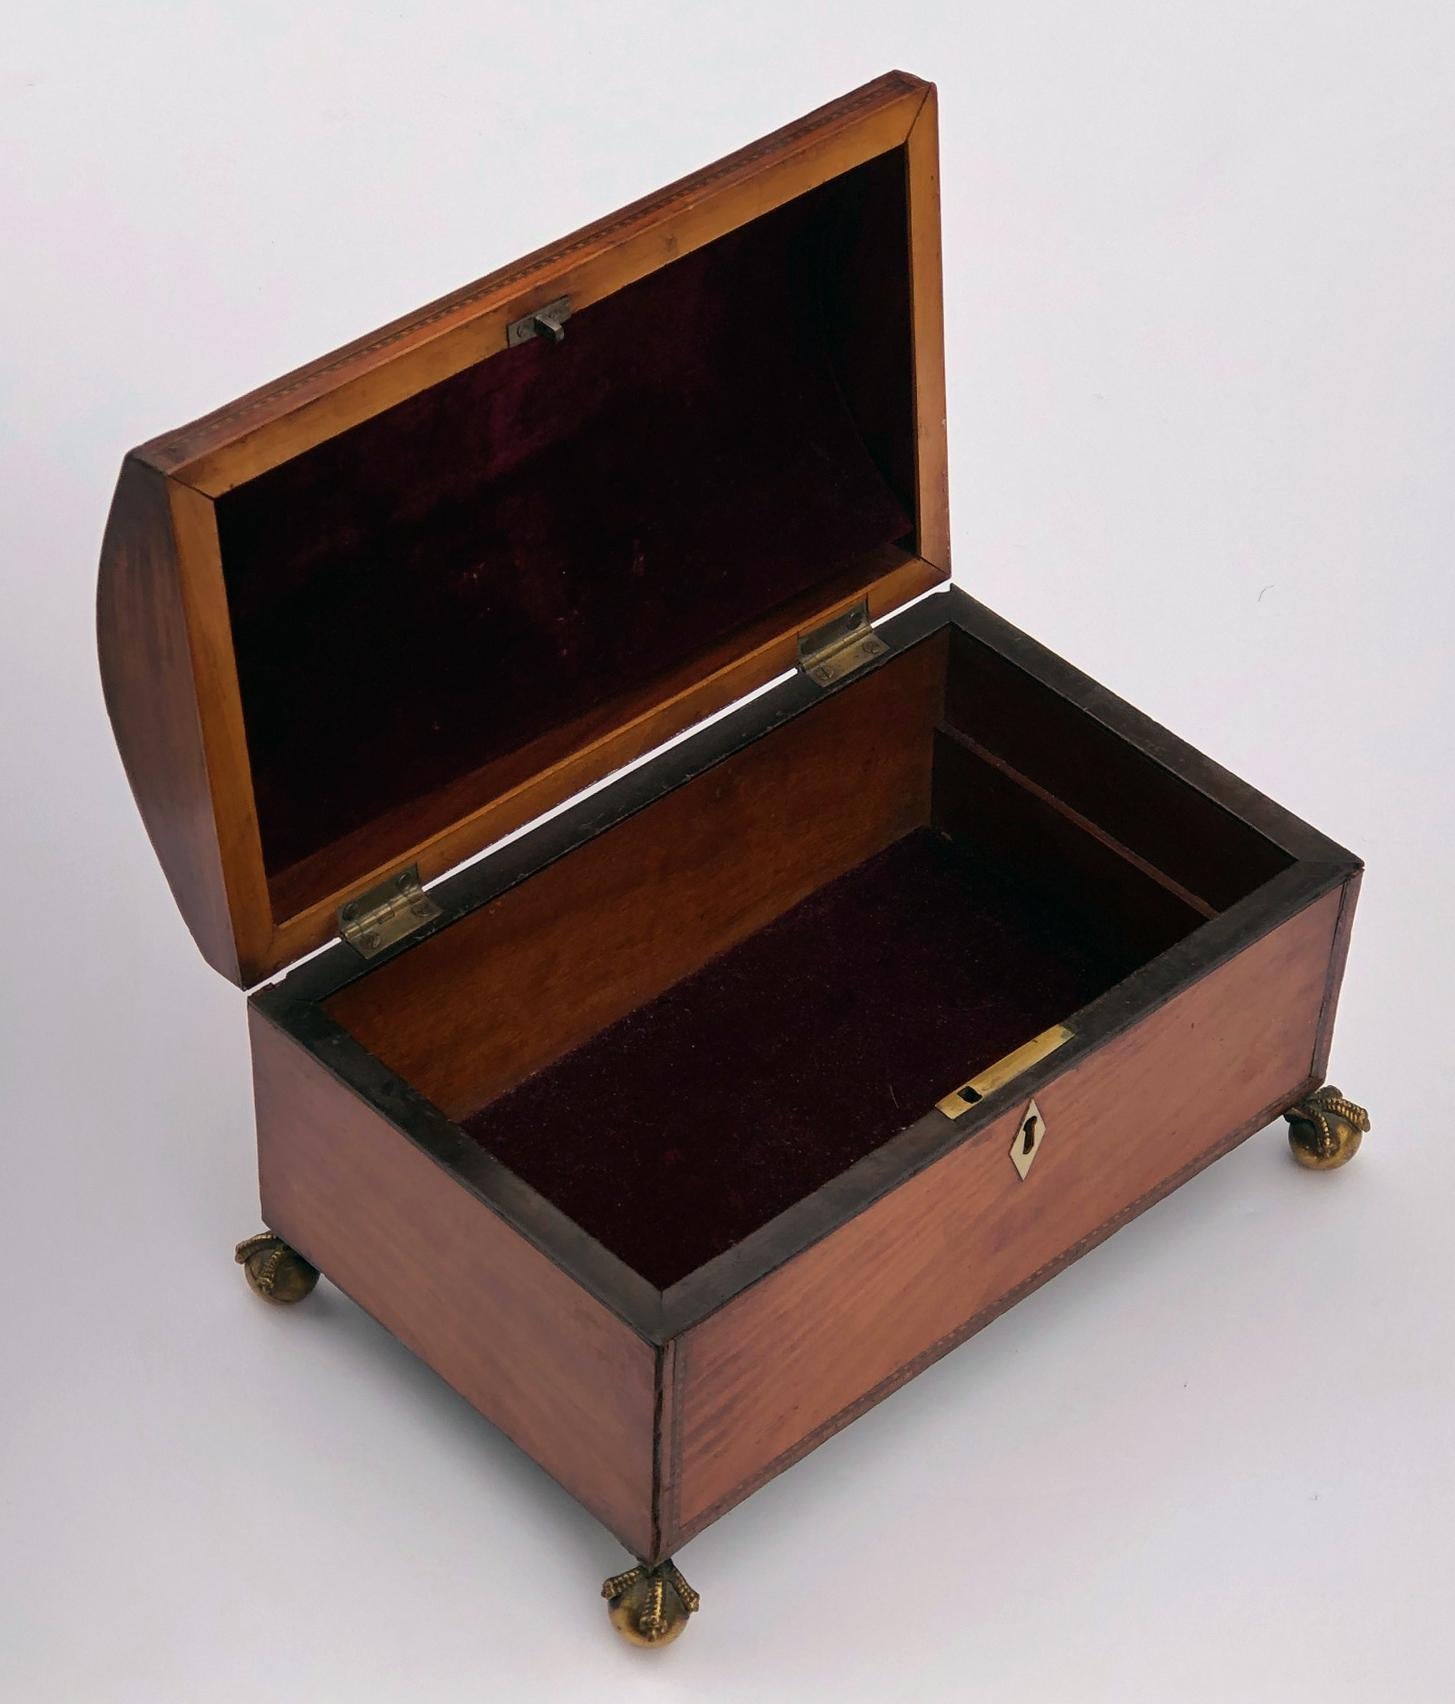 with domed lid centering an inlaid shell medallion; all resting on a rectangular body raised on brass ball and claw feet; later velvet-lined interior.